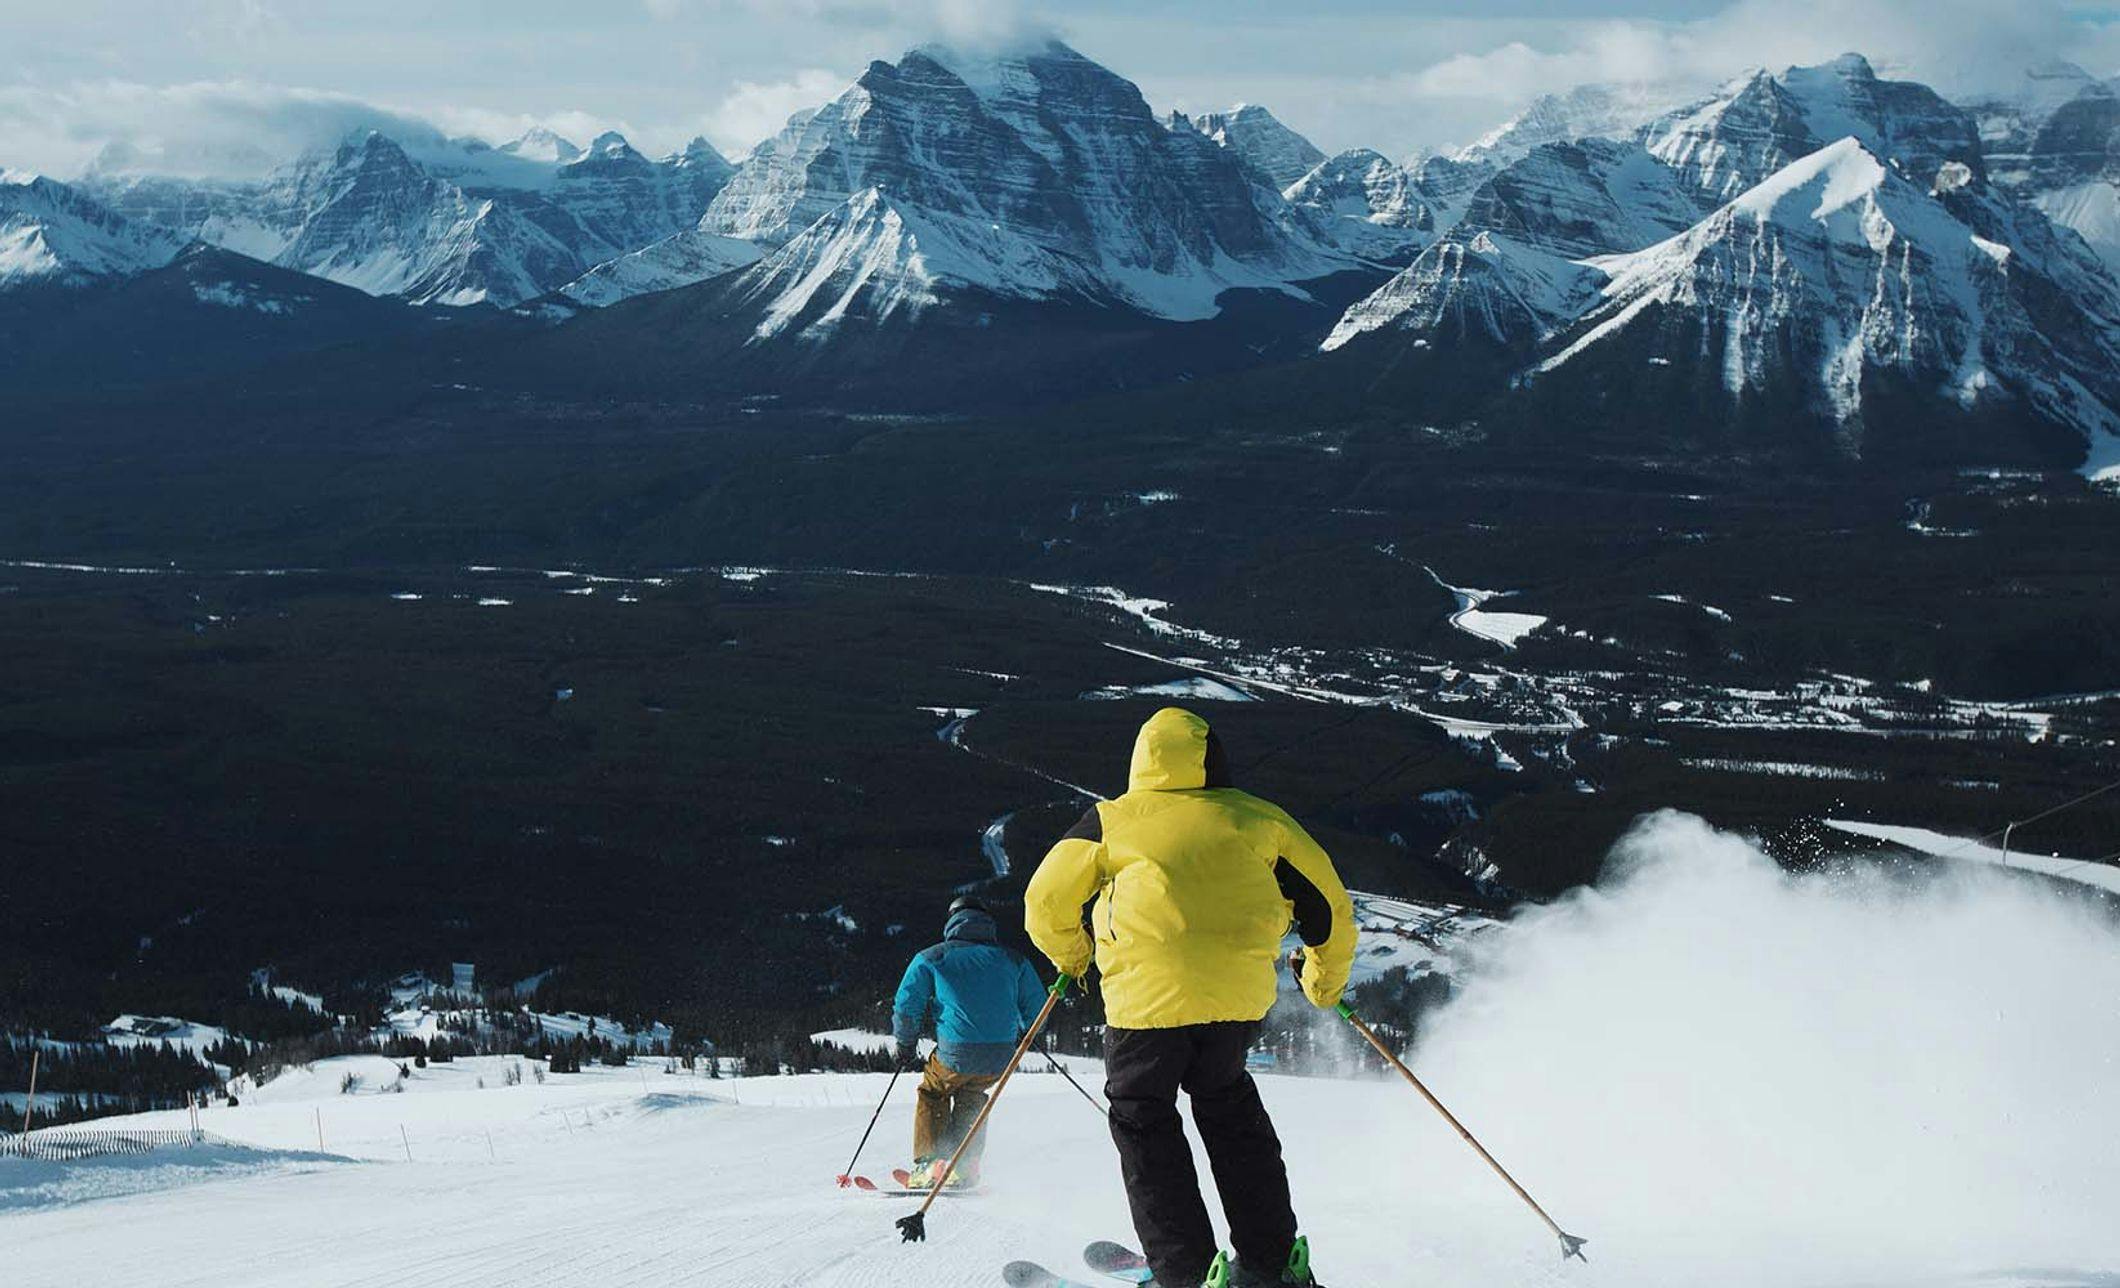 Two people ski down a run at the Lake Louise Ski Resort in Banff National Park.